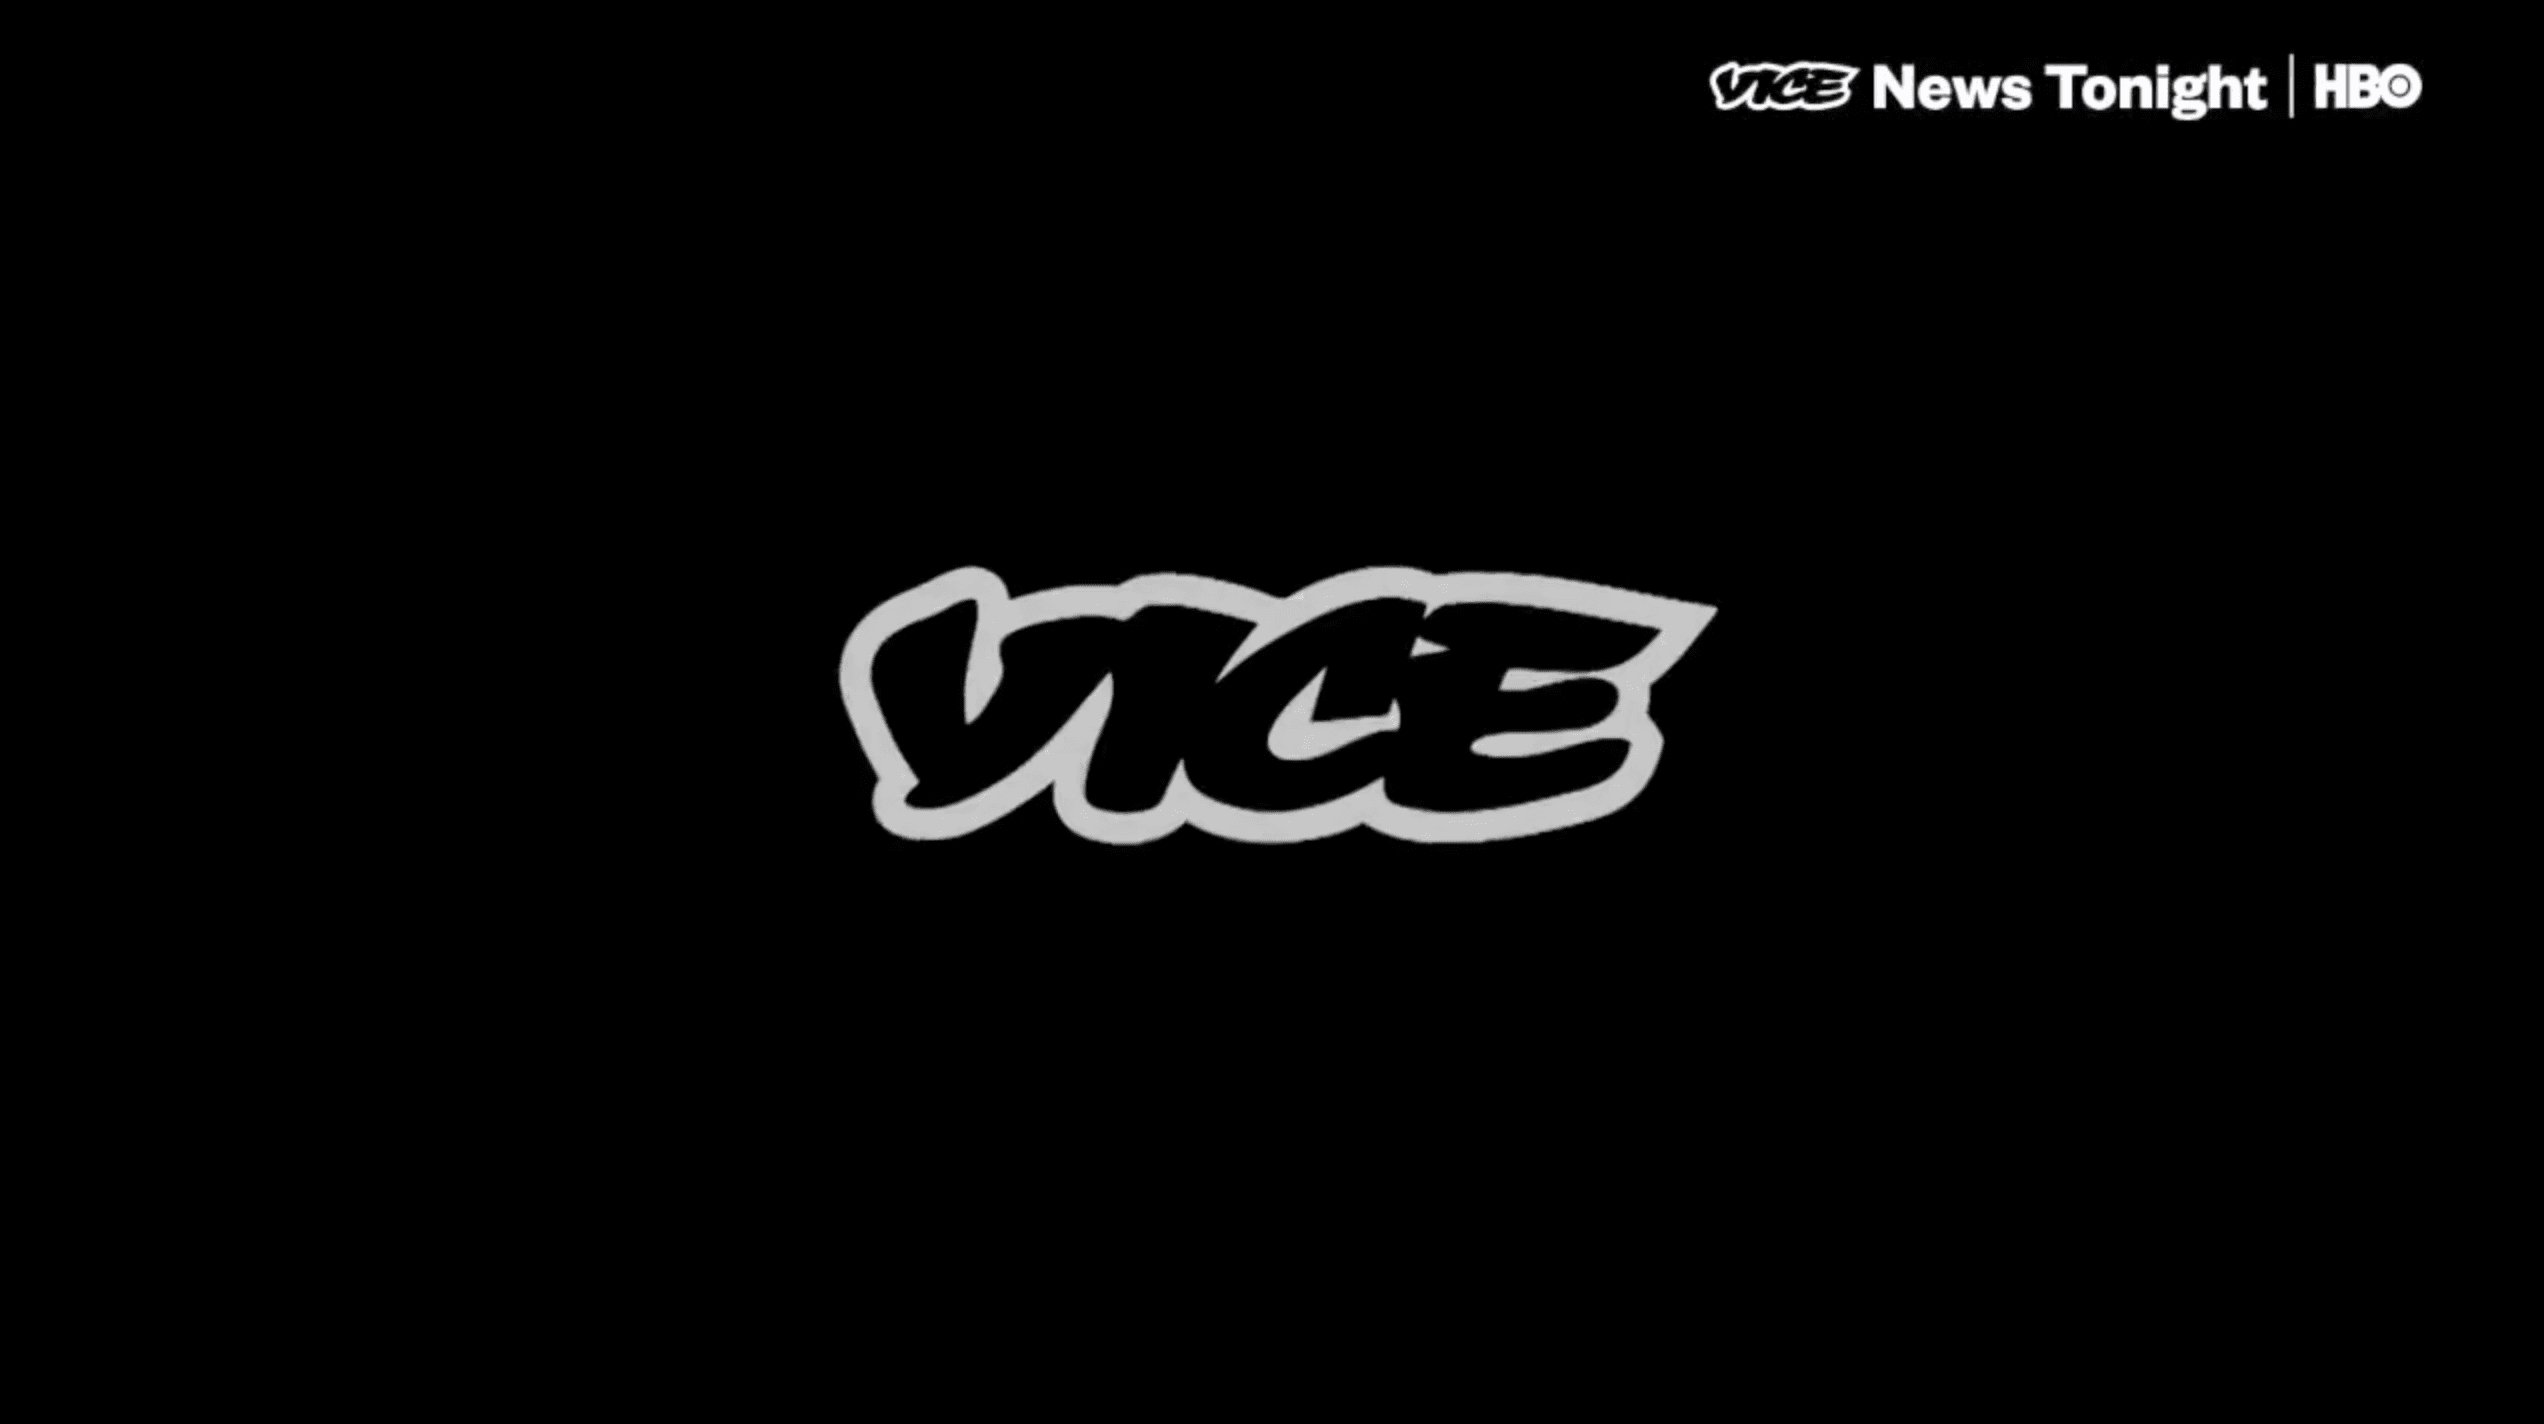 Cerise Castle's Journalistic Reel for Vice on HBO